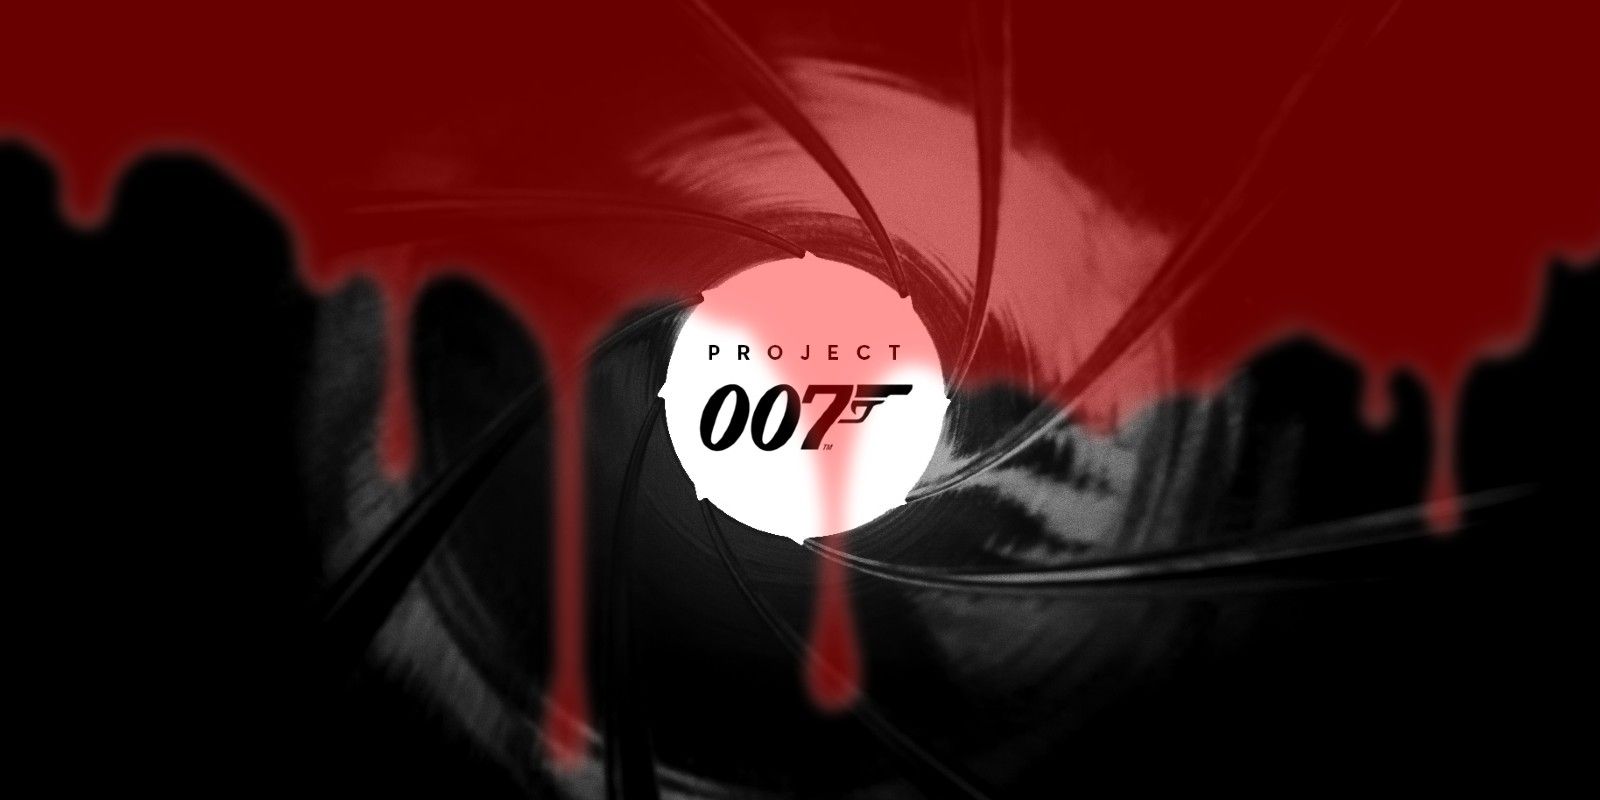 project 007 news